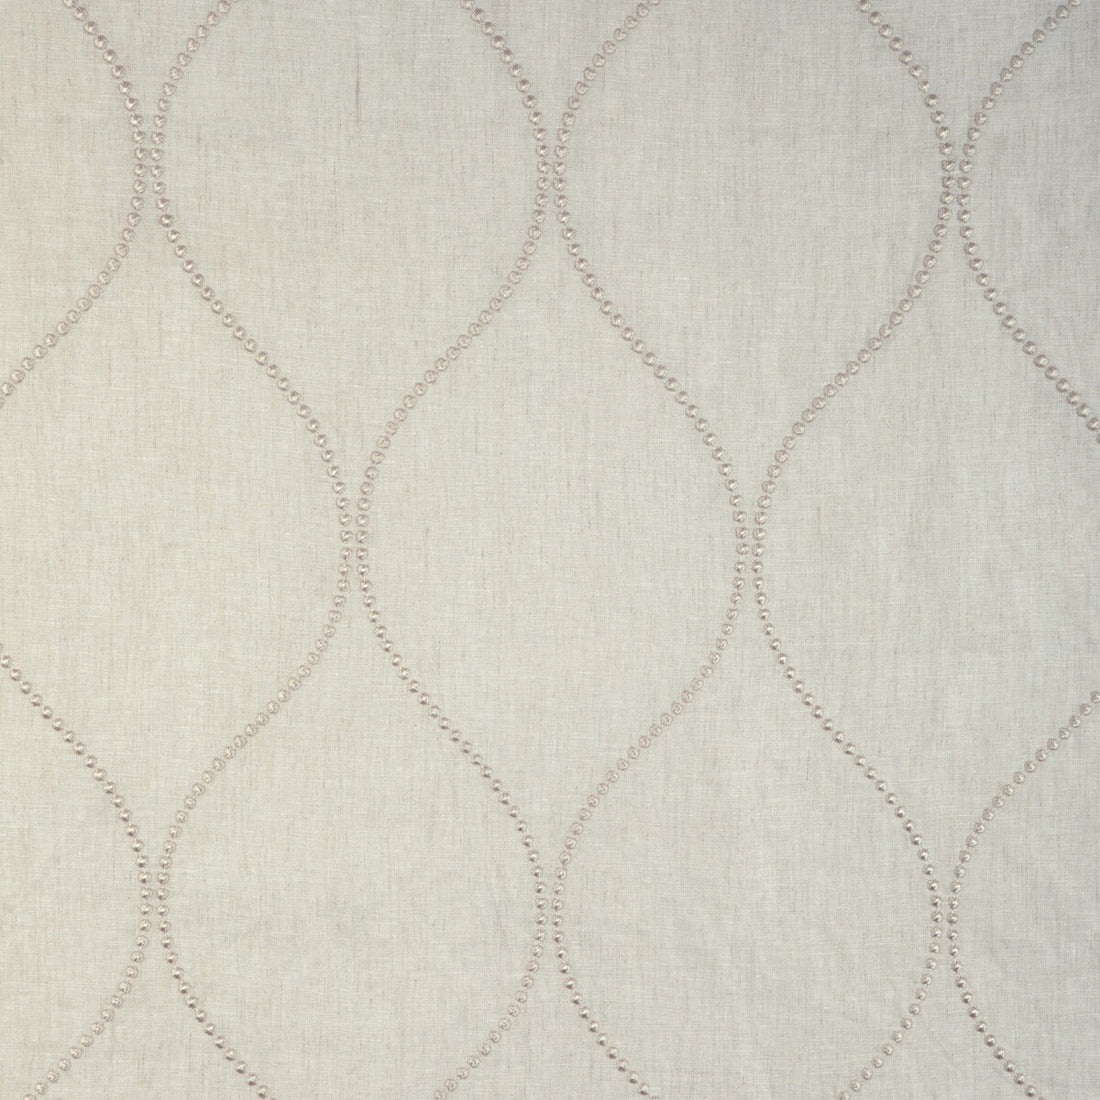 Kiley fabric in linen color - pattern 4201.106.0 - by Kravet Design in the Candice Olson collection